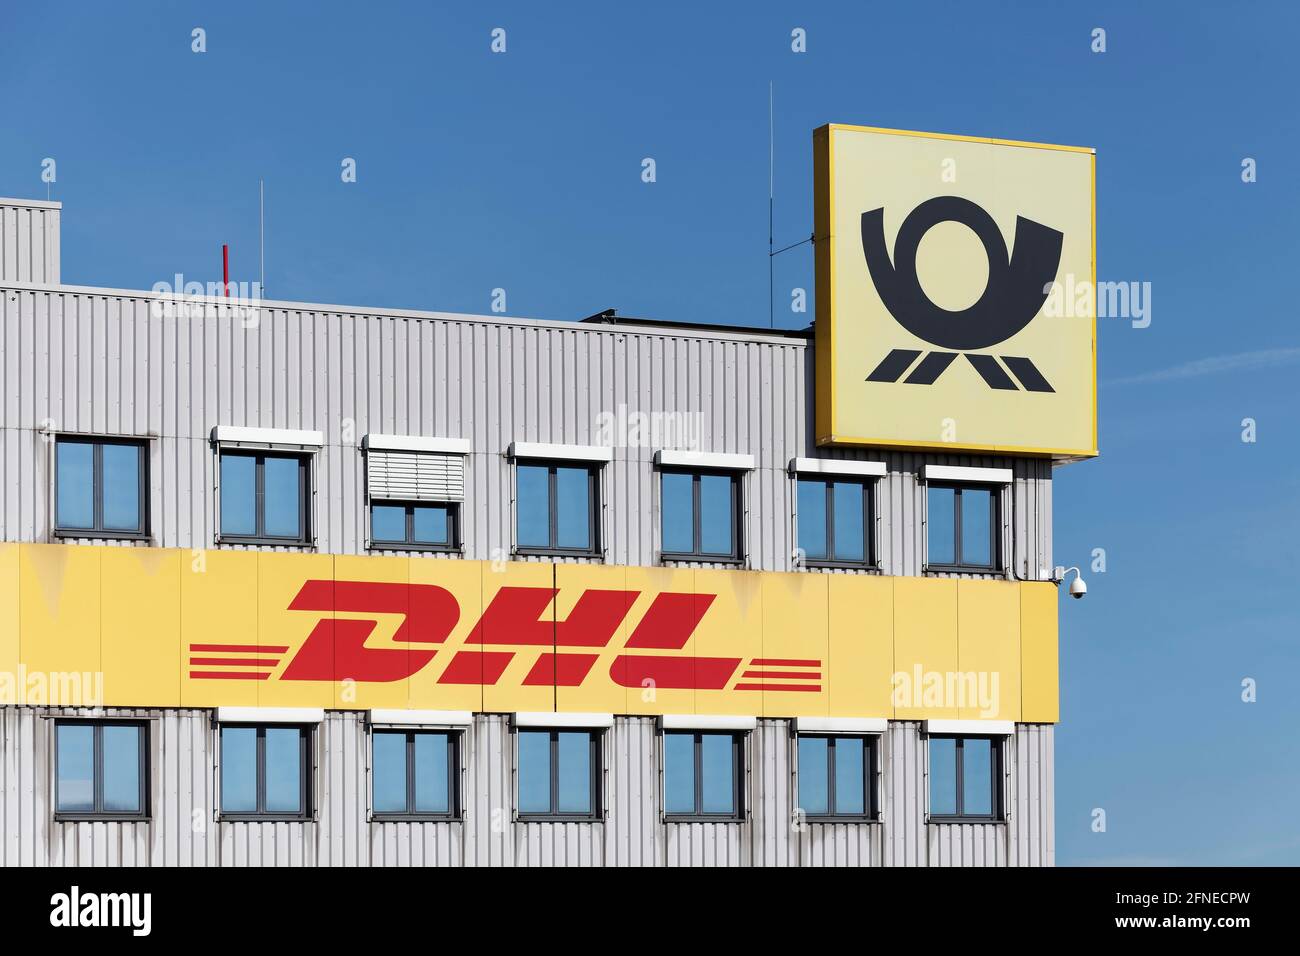 Logos DHL and Deutsche Post, DHL parcel centre Krefeld, parcel and letter express service, North Rhine-Westphalia, Germany Stock Photo